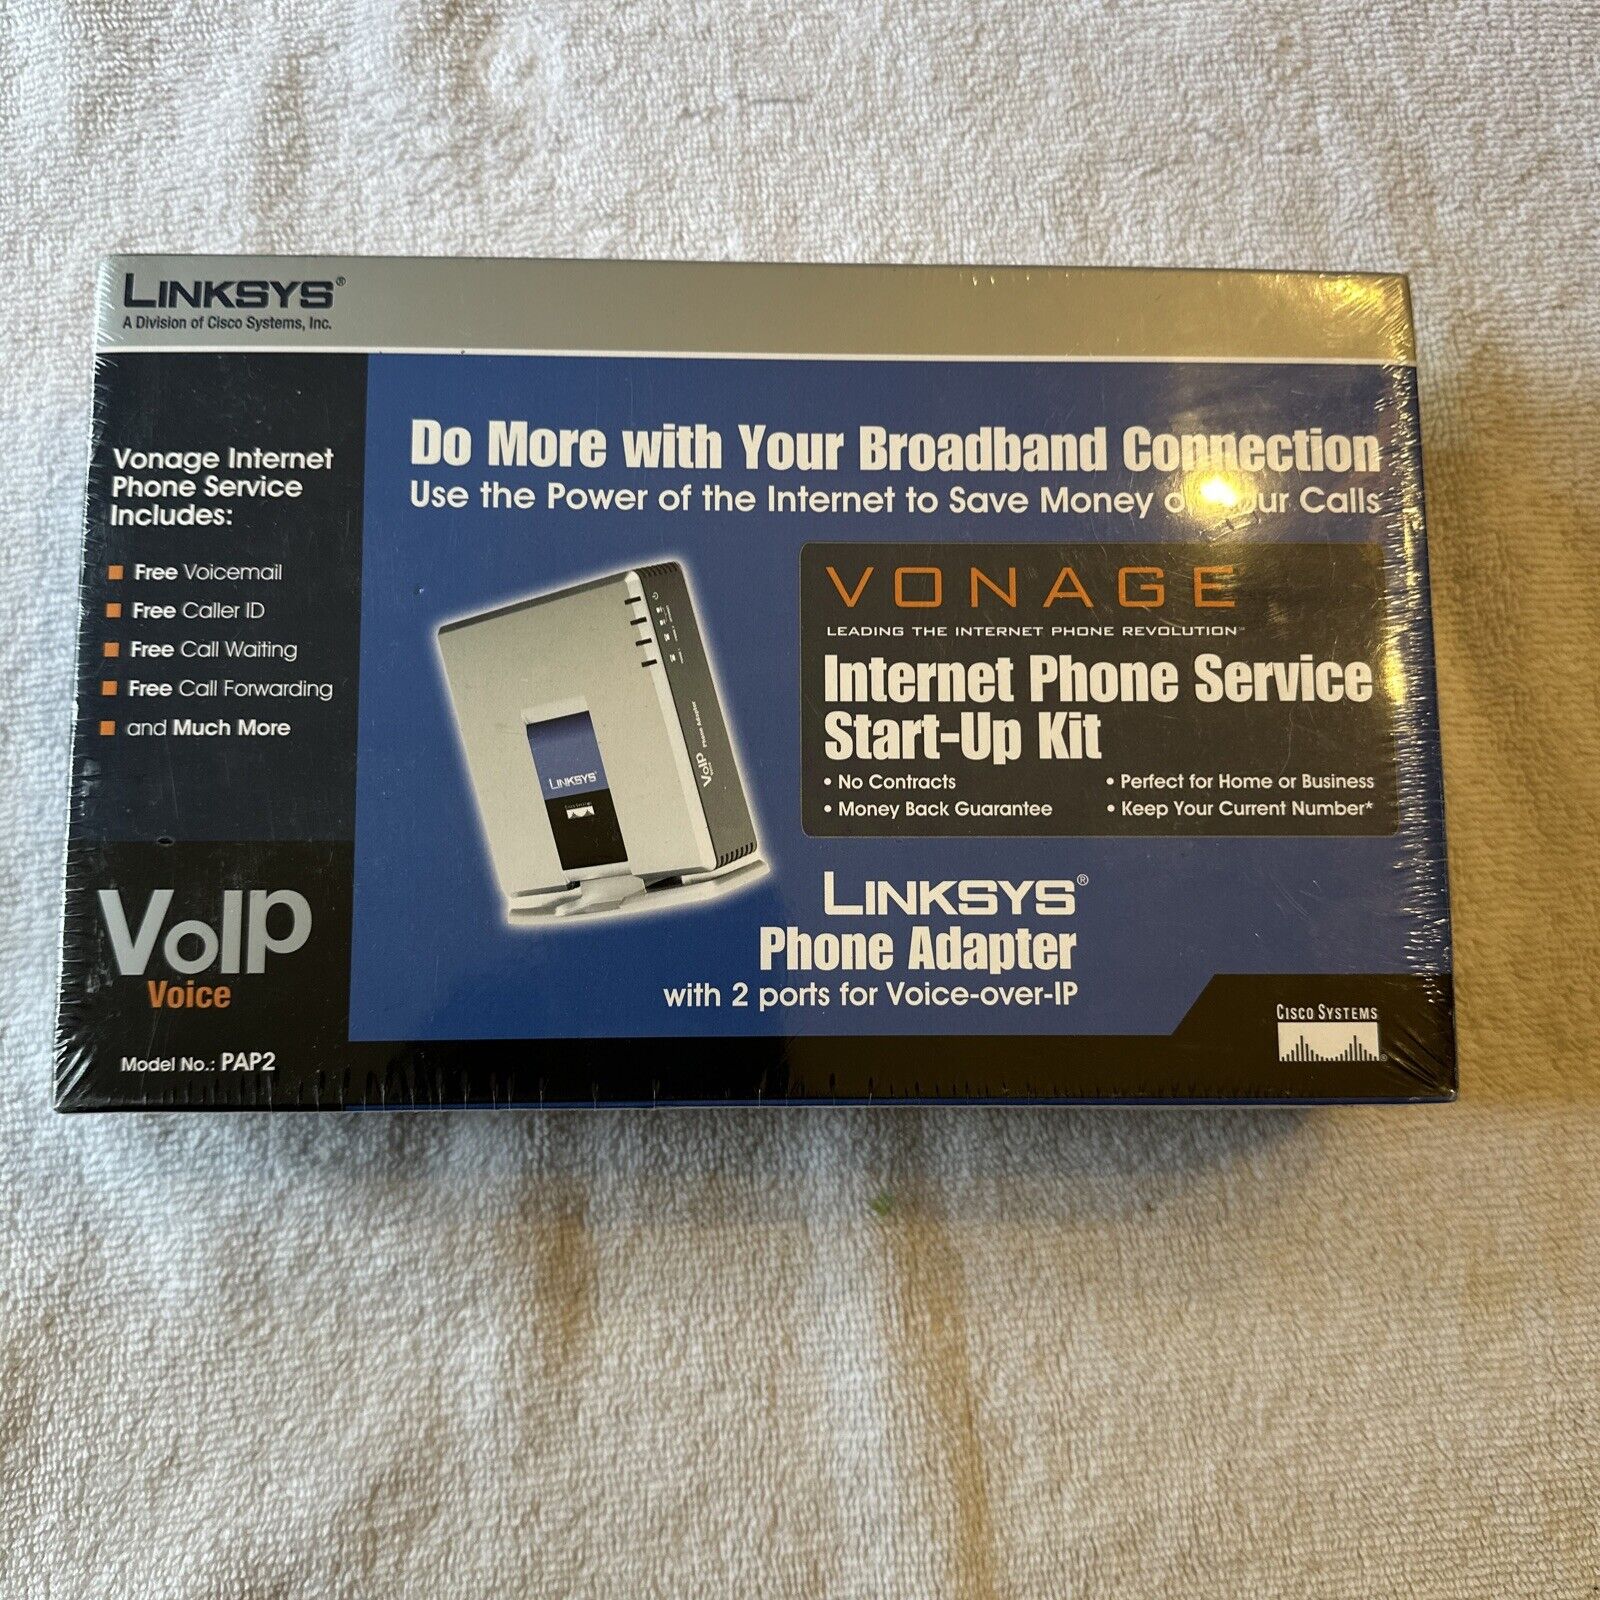 Linksys Phone Adapter Vonage with 2 Port Voice Over IP VOIP PAP2 - NEW SEALED